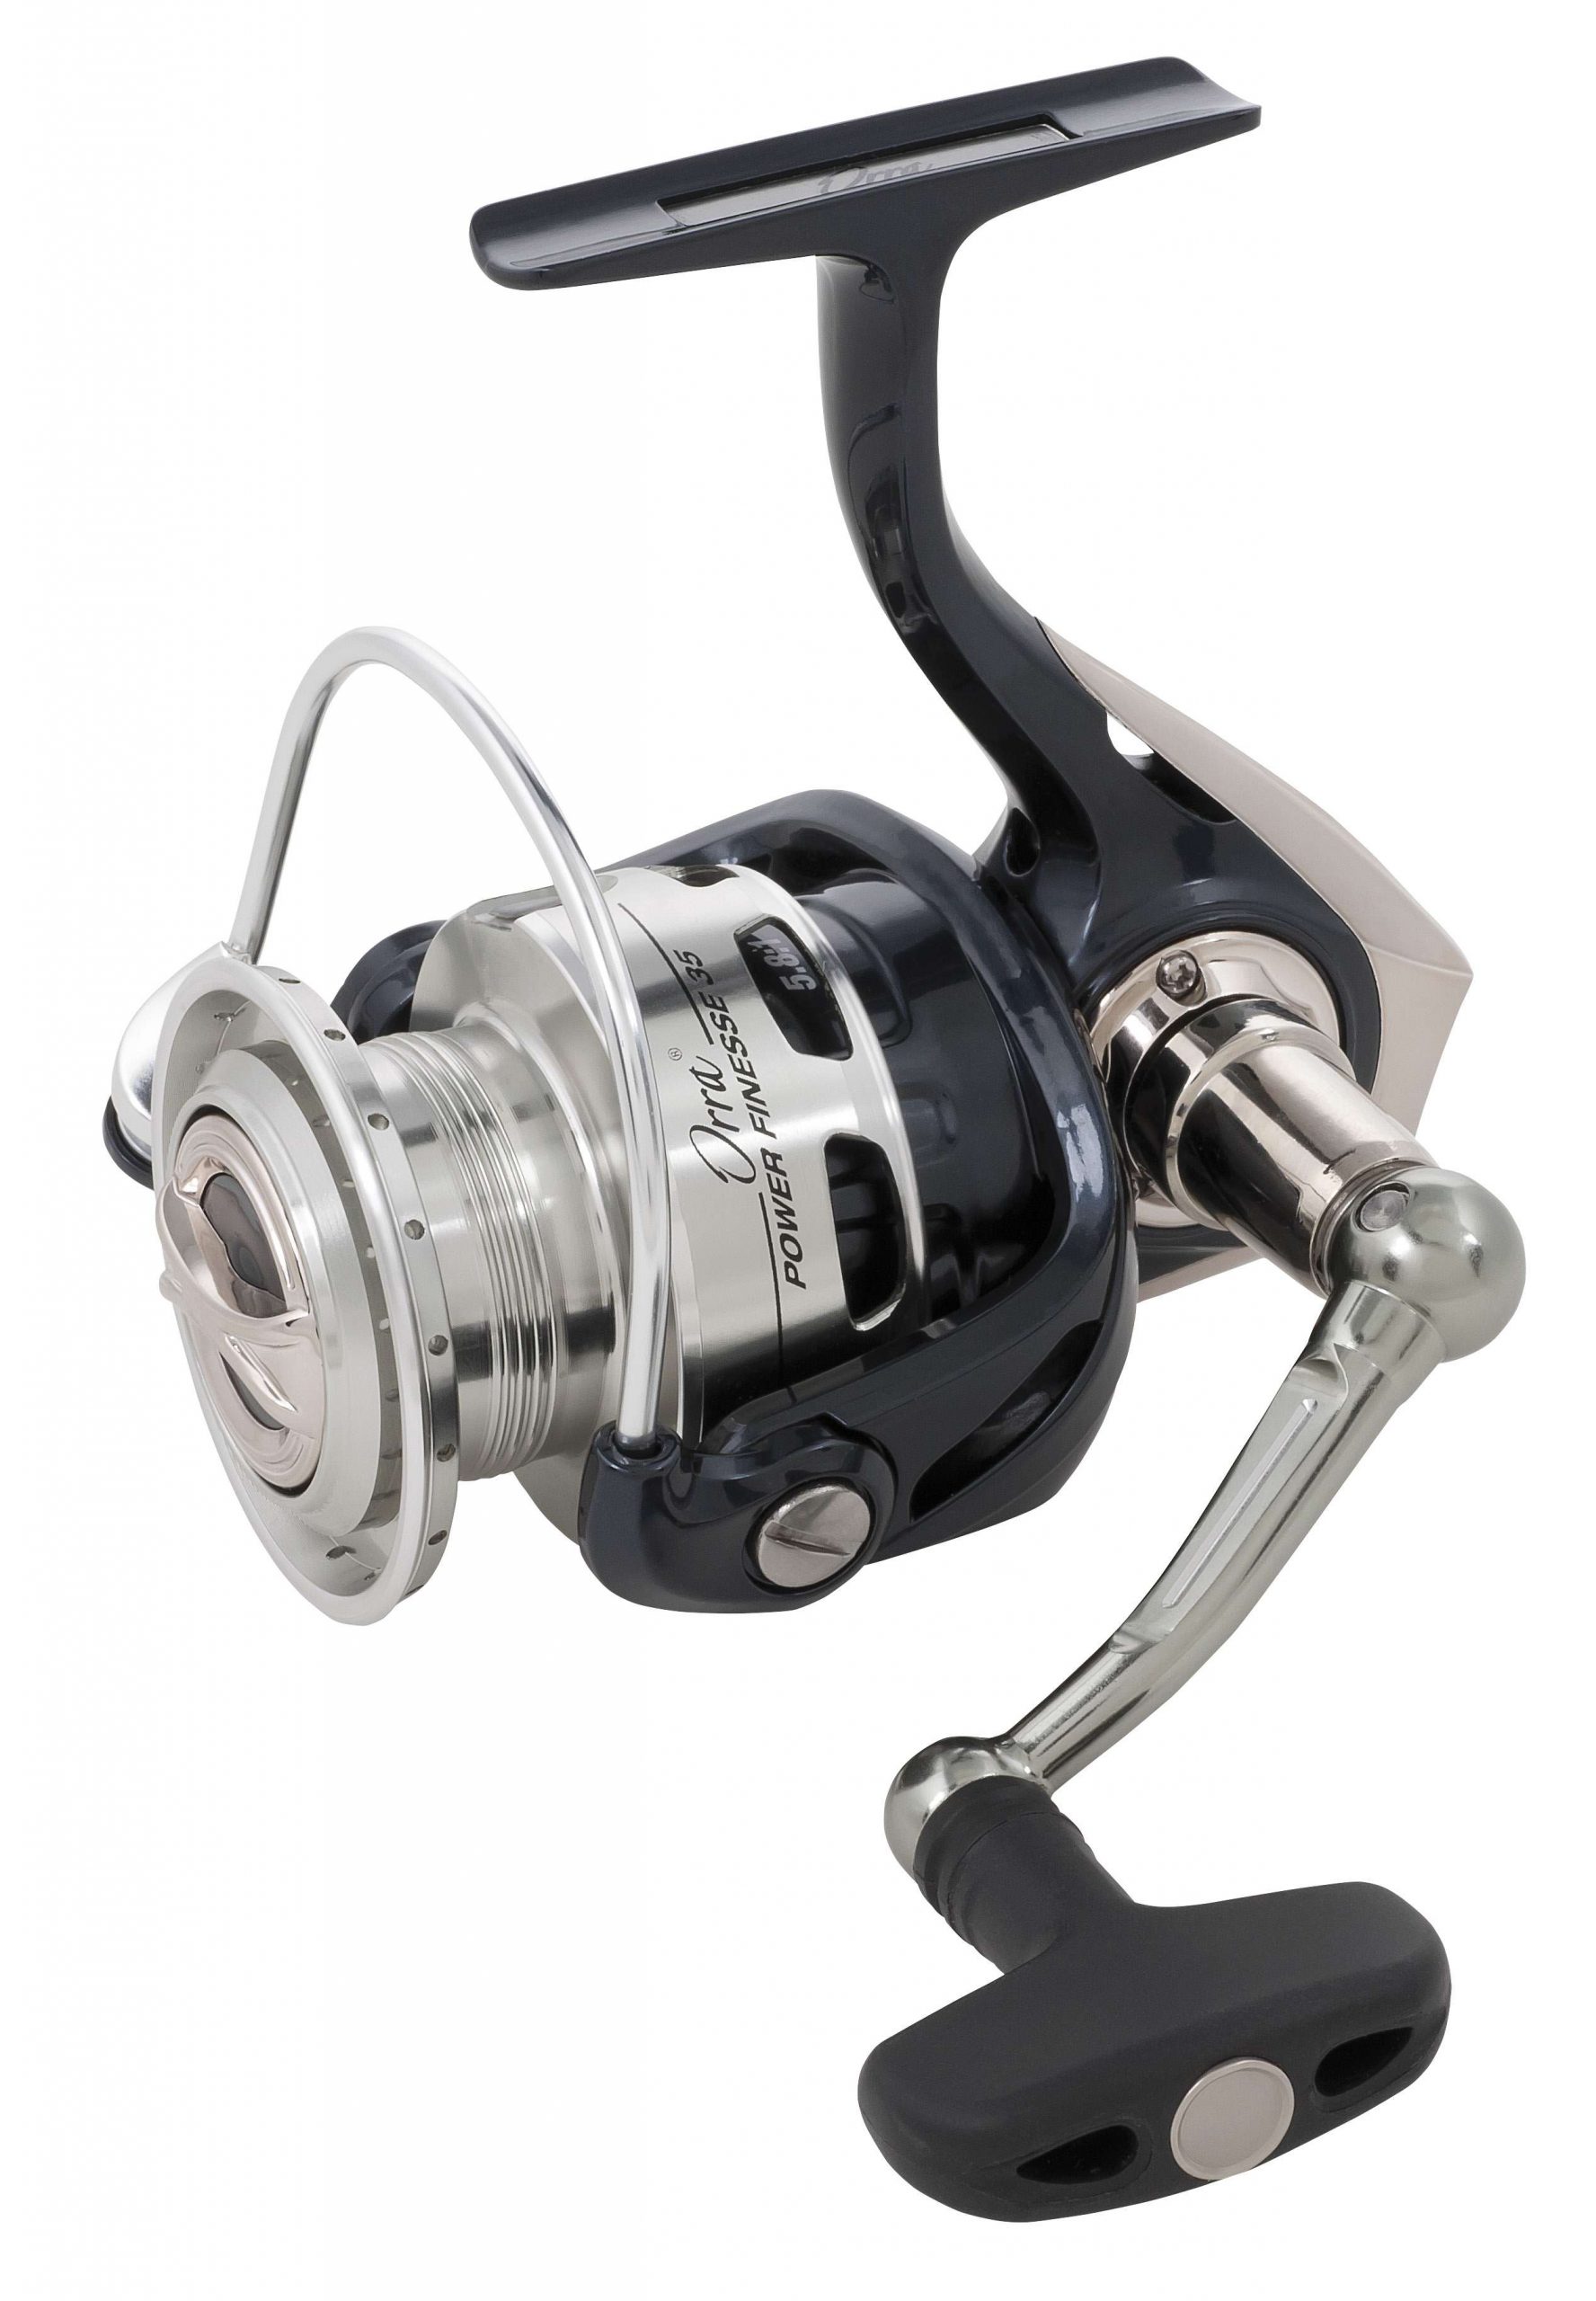 34 new products debuting at the Classic - Bassmaster